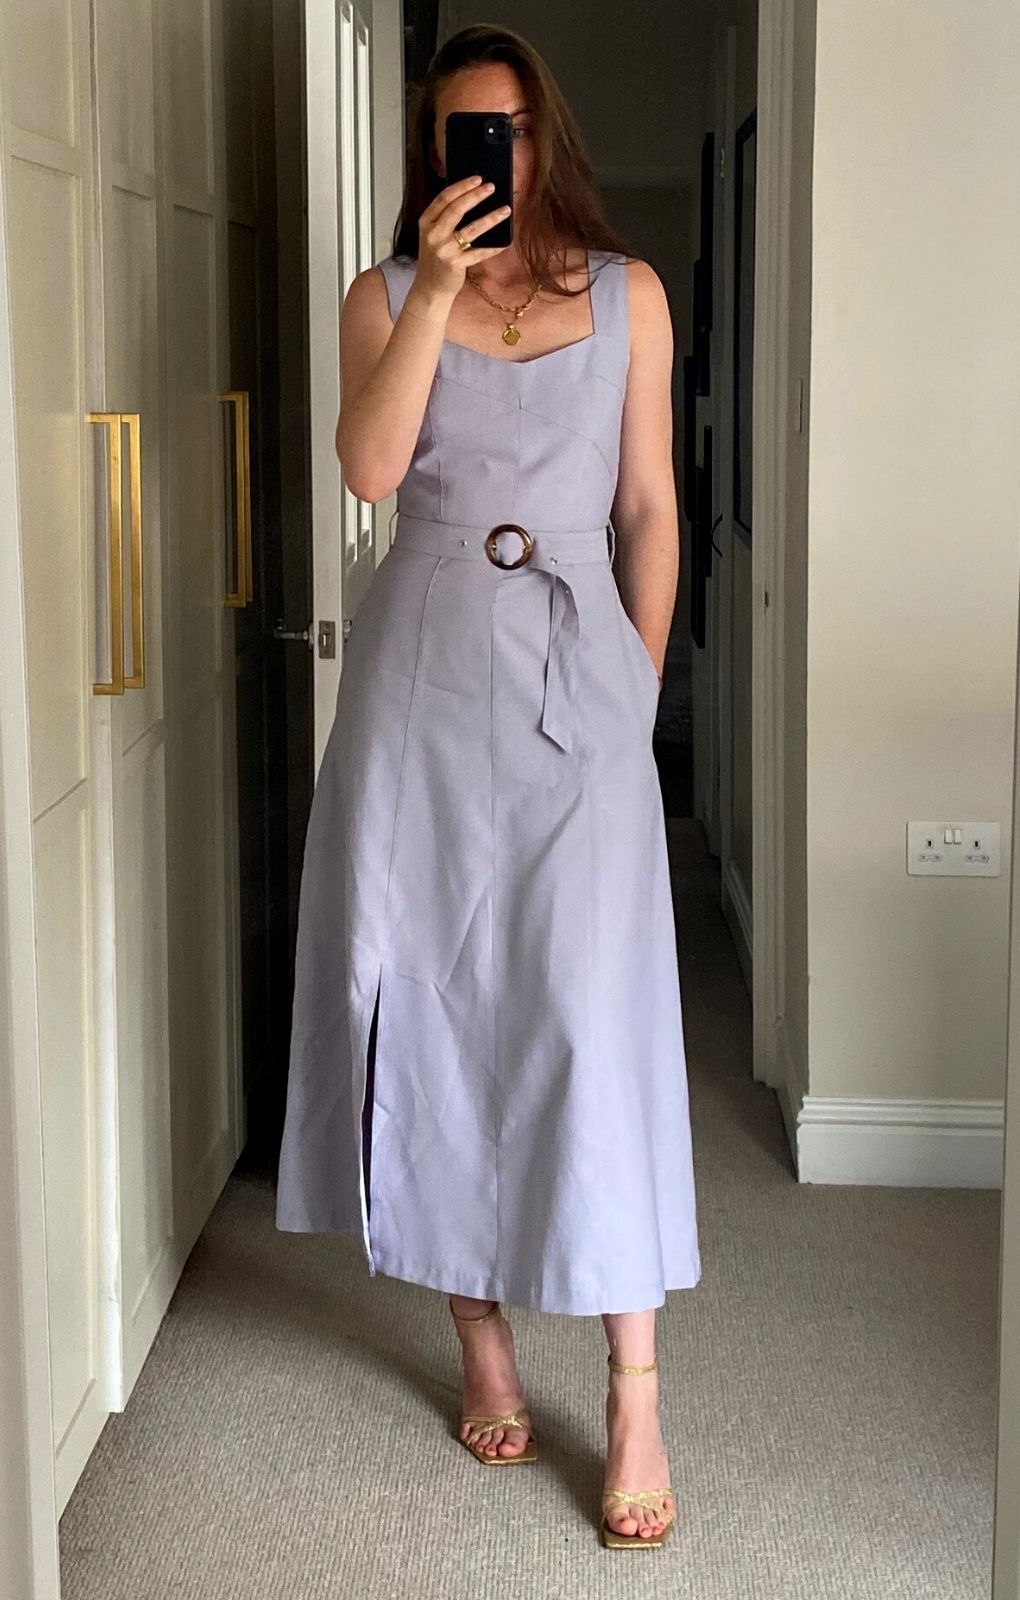 Oasis Belted Linen Look Midi Dress product image